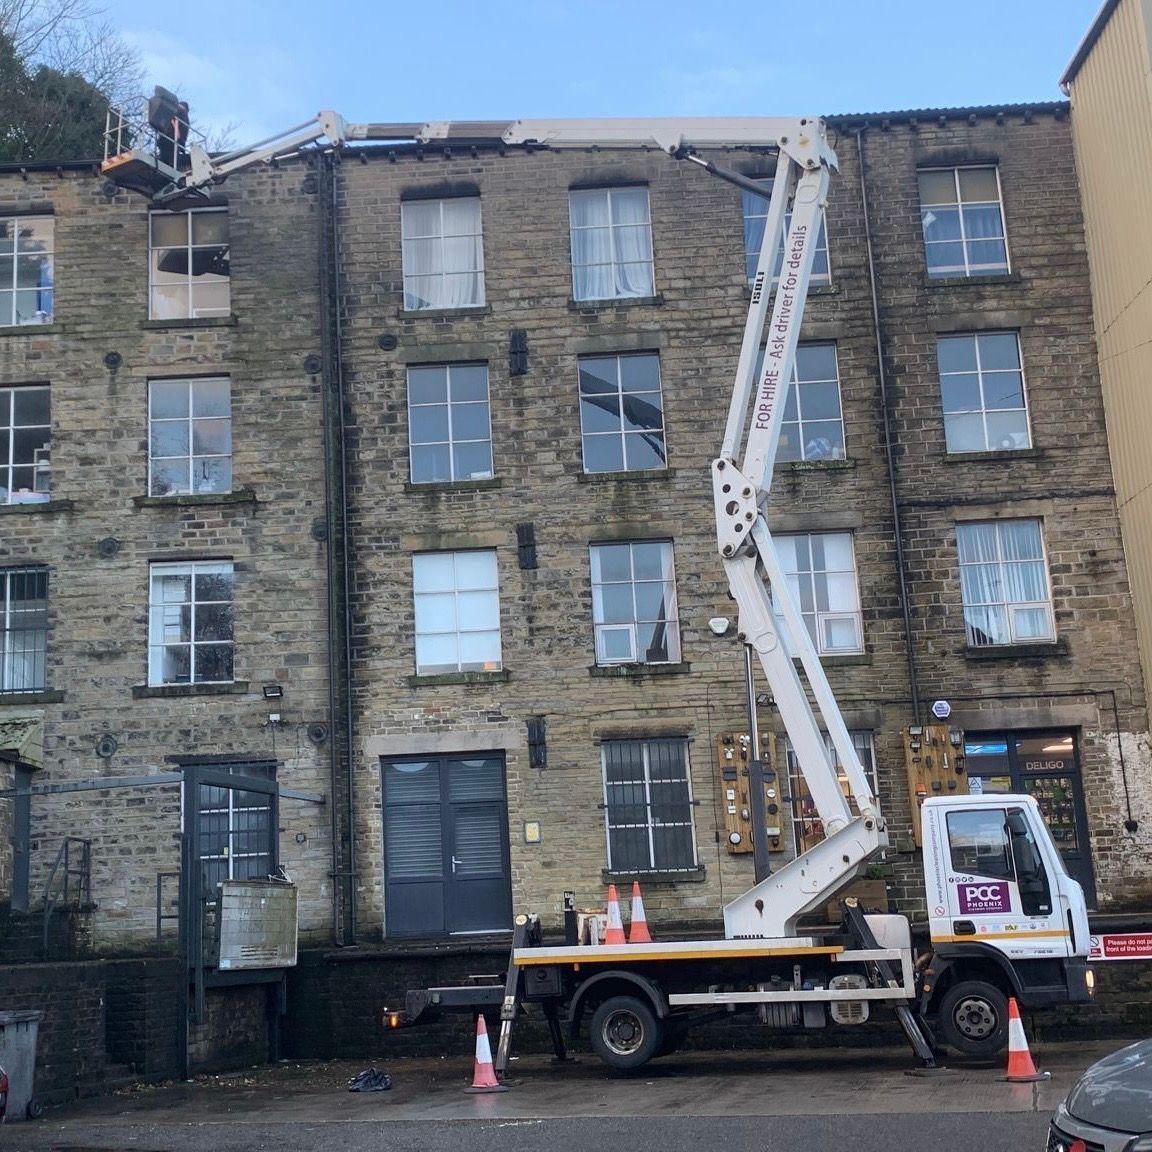 PCC - WORK AT HEIGHT SAFELY AND EFFICIENTLY WITH OUR 28M CHERRY PICKER

Contact us now to discuss your requirements on 0330 124 4085 buff.ly/3AM51oF 

#CherryPickerHire #Leeds #WorkingAtHeight #AccessEquipmentHire